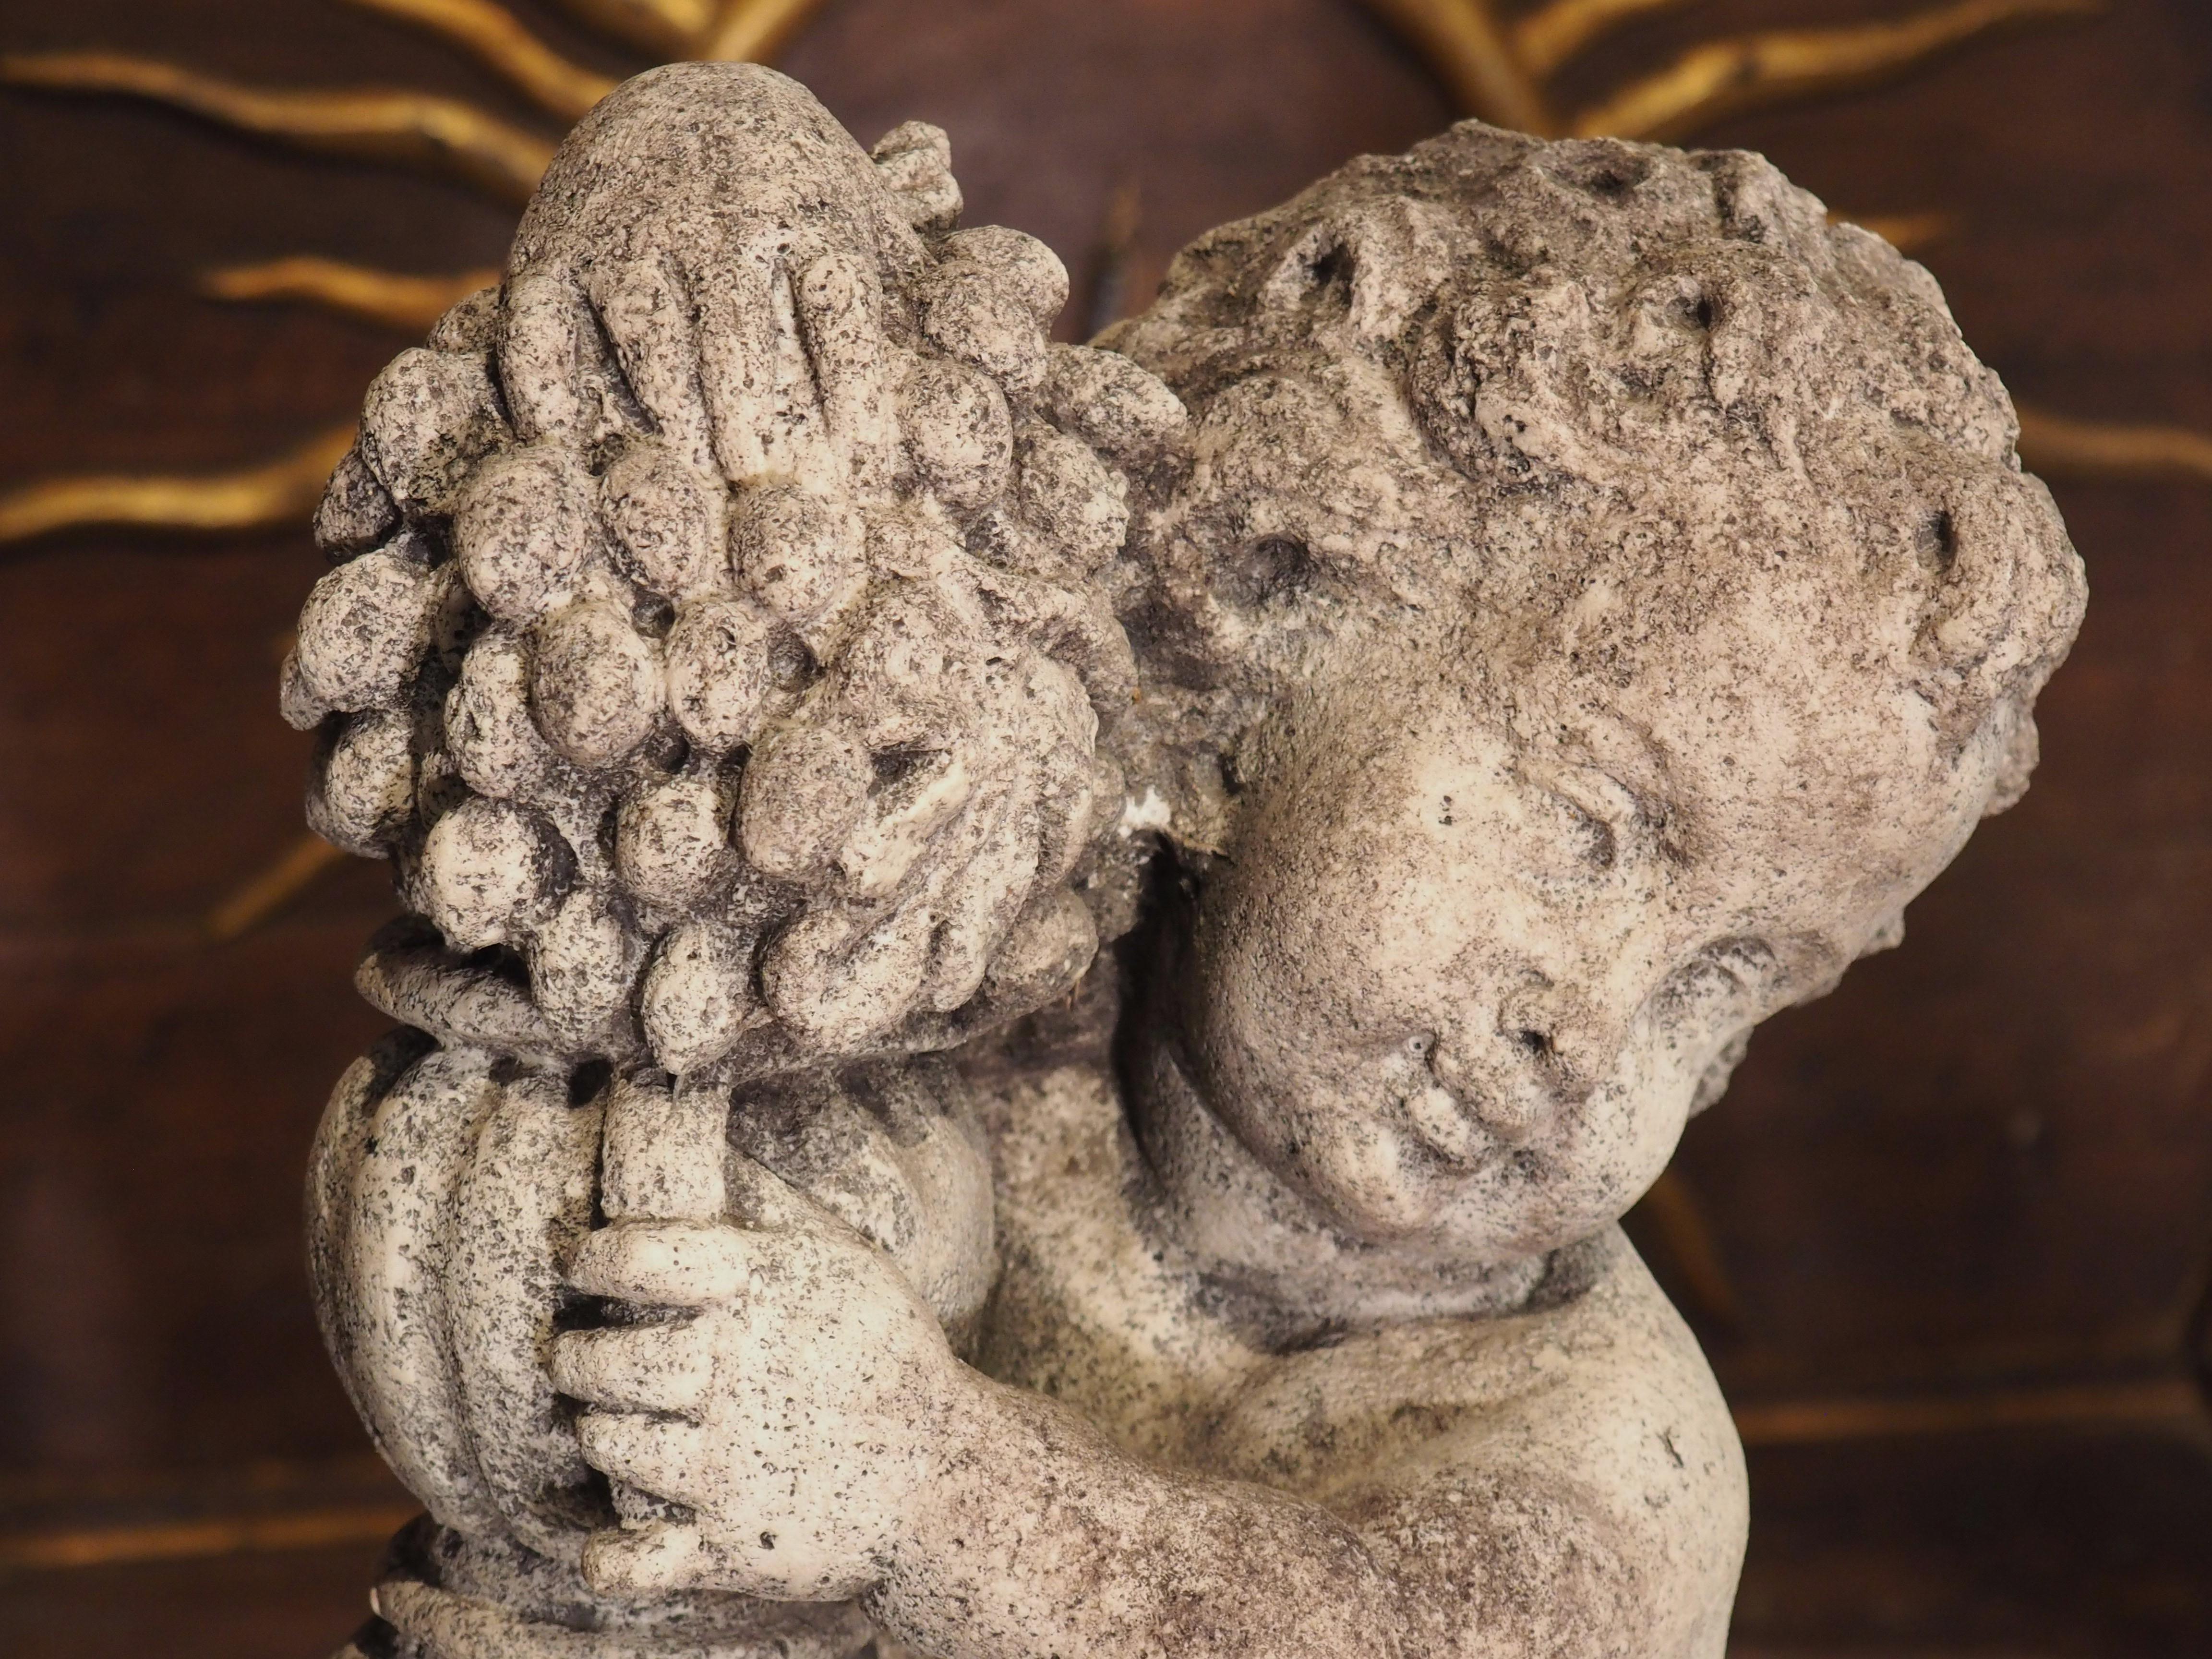 Made from cast stone in the 1900’s, this Italian statue depicts a bacchanalian putto leaning against an urn and a tree stump. As with most renderings that occurred during the Renaissance and after, our putto is depicted as a chubby male child